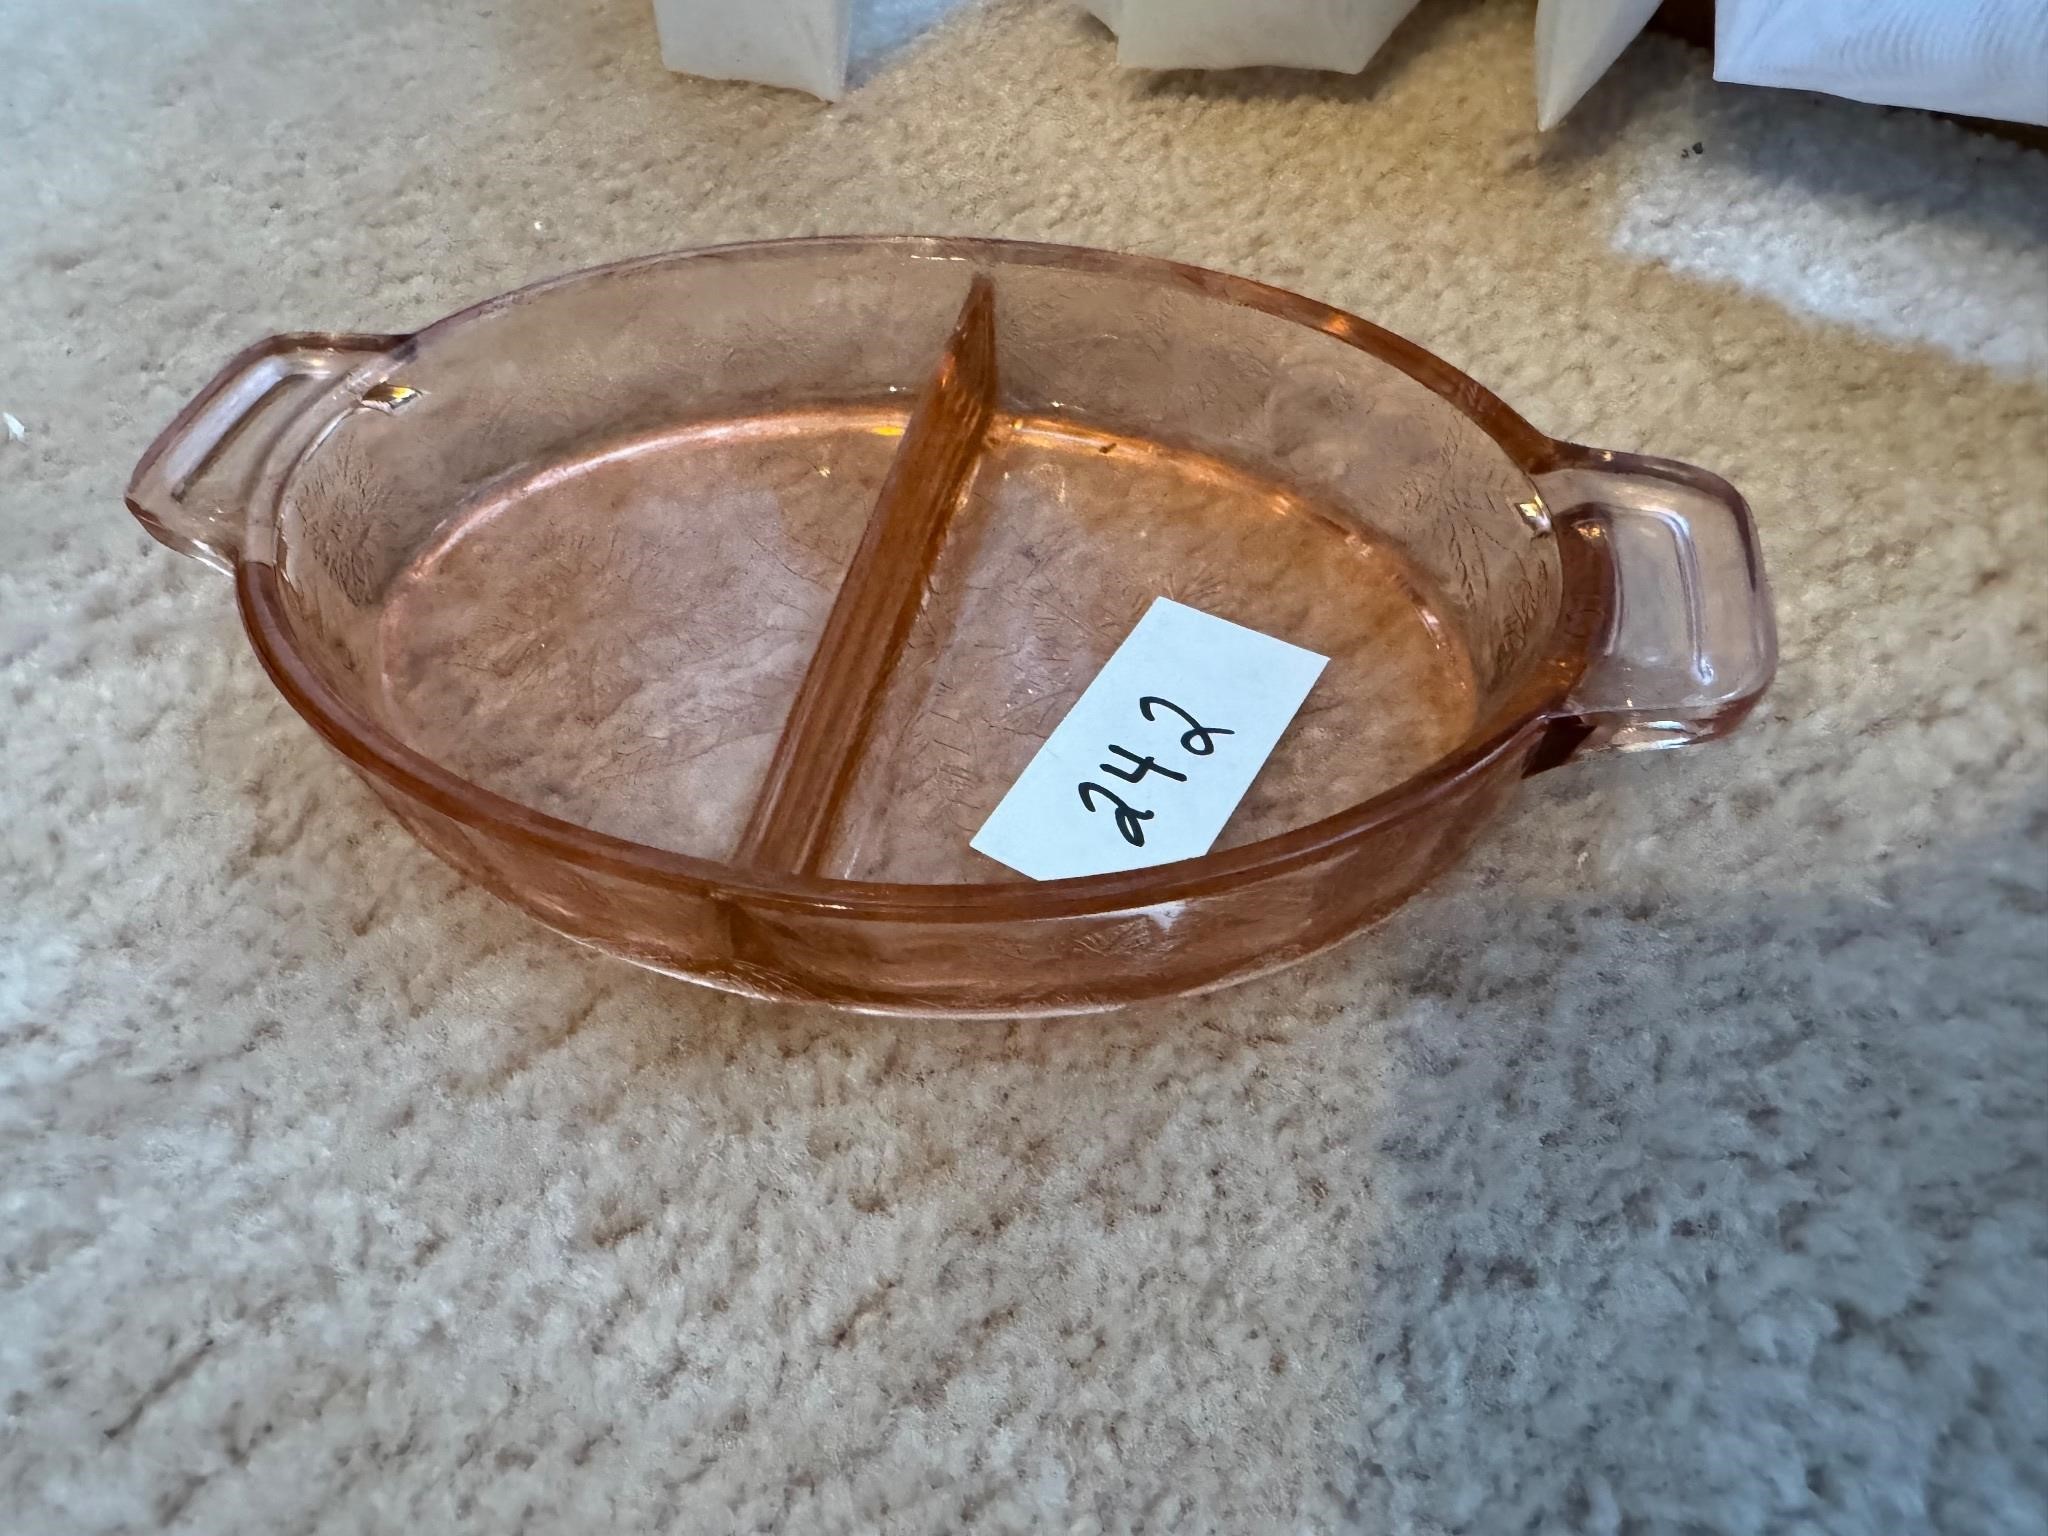 PINK DEP. GLASS DIVIDED TRAY 8 1/4" X 5" X 1 1/2"